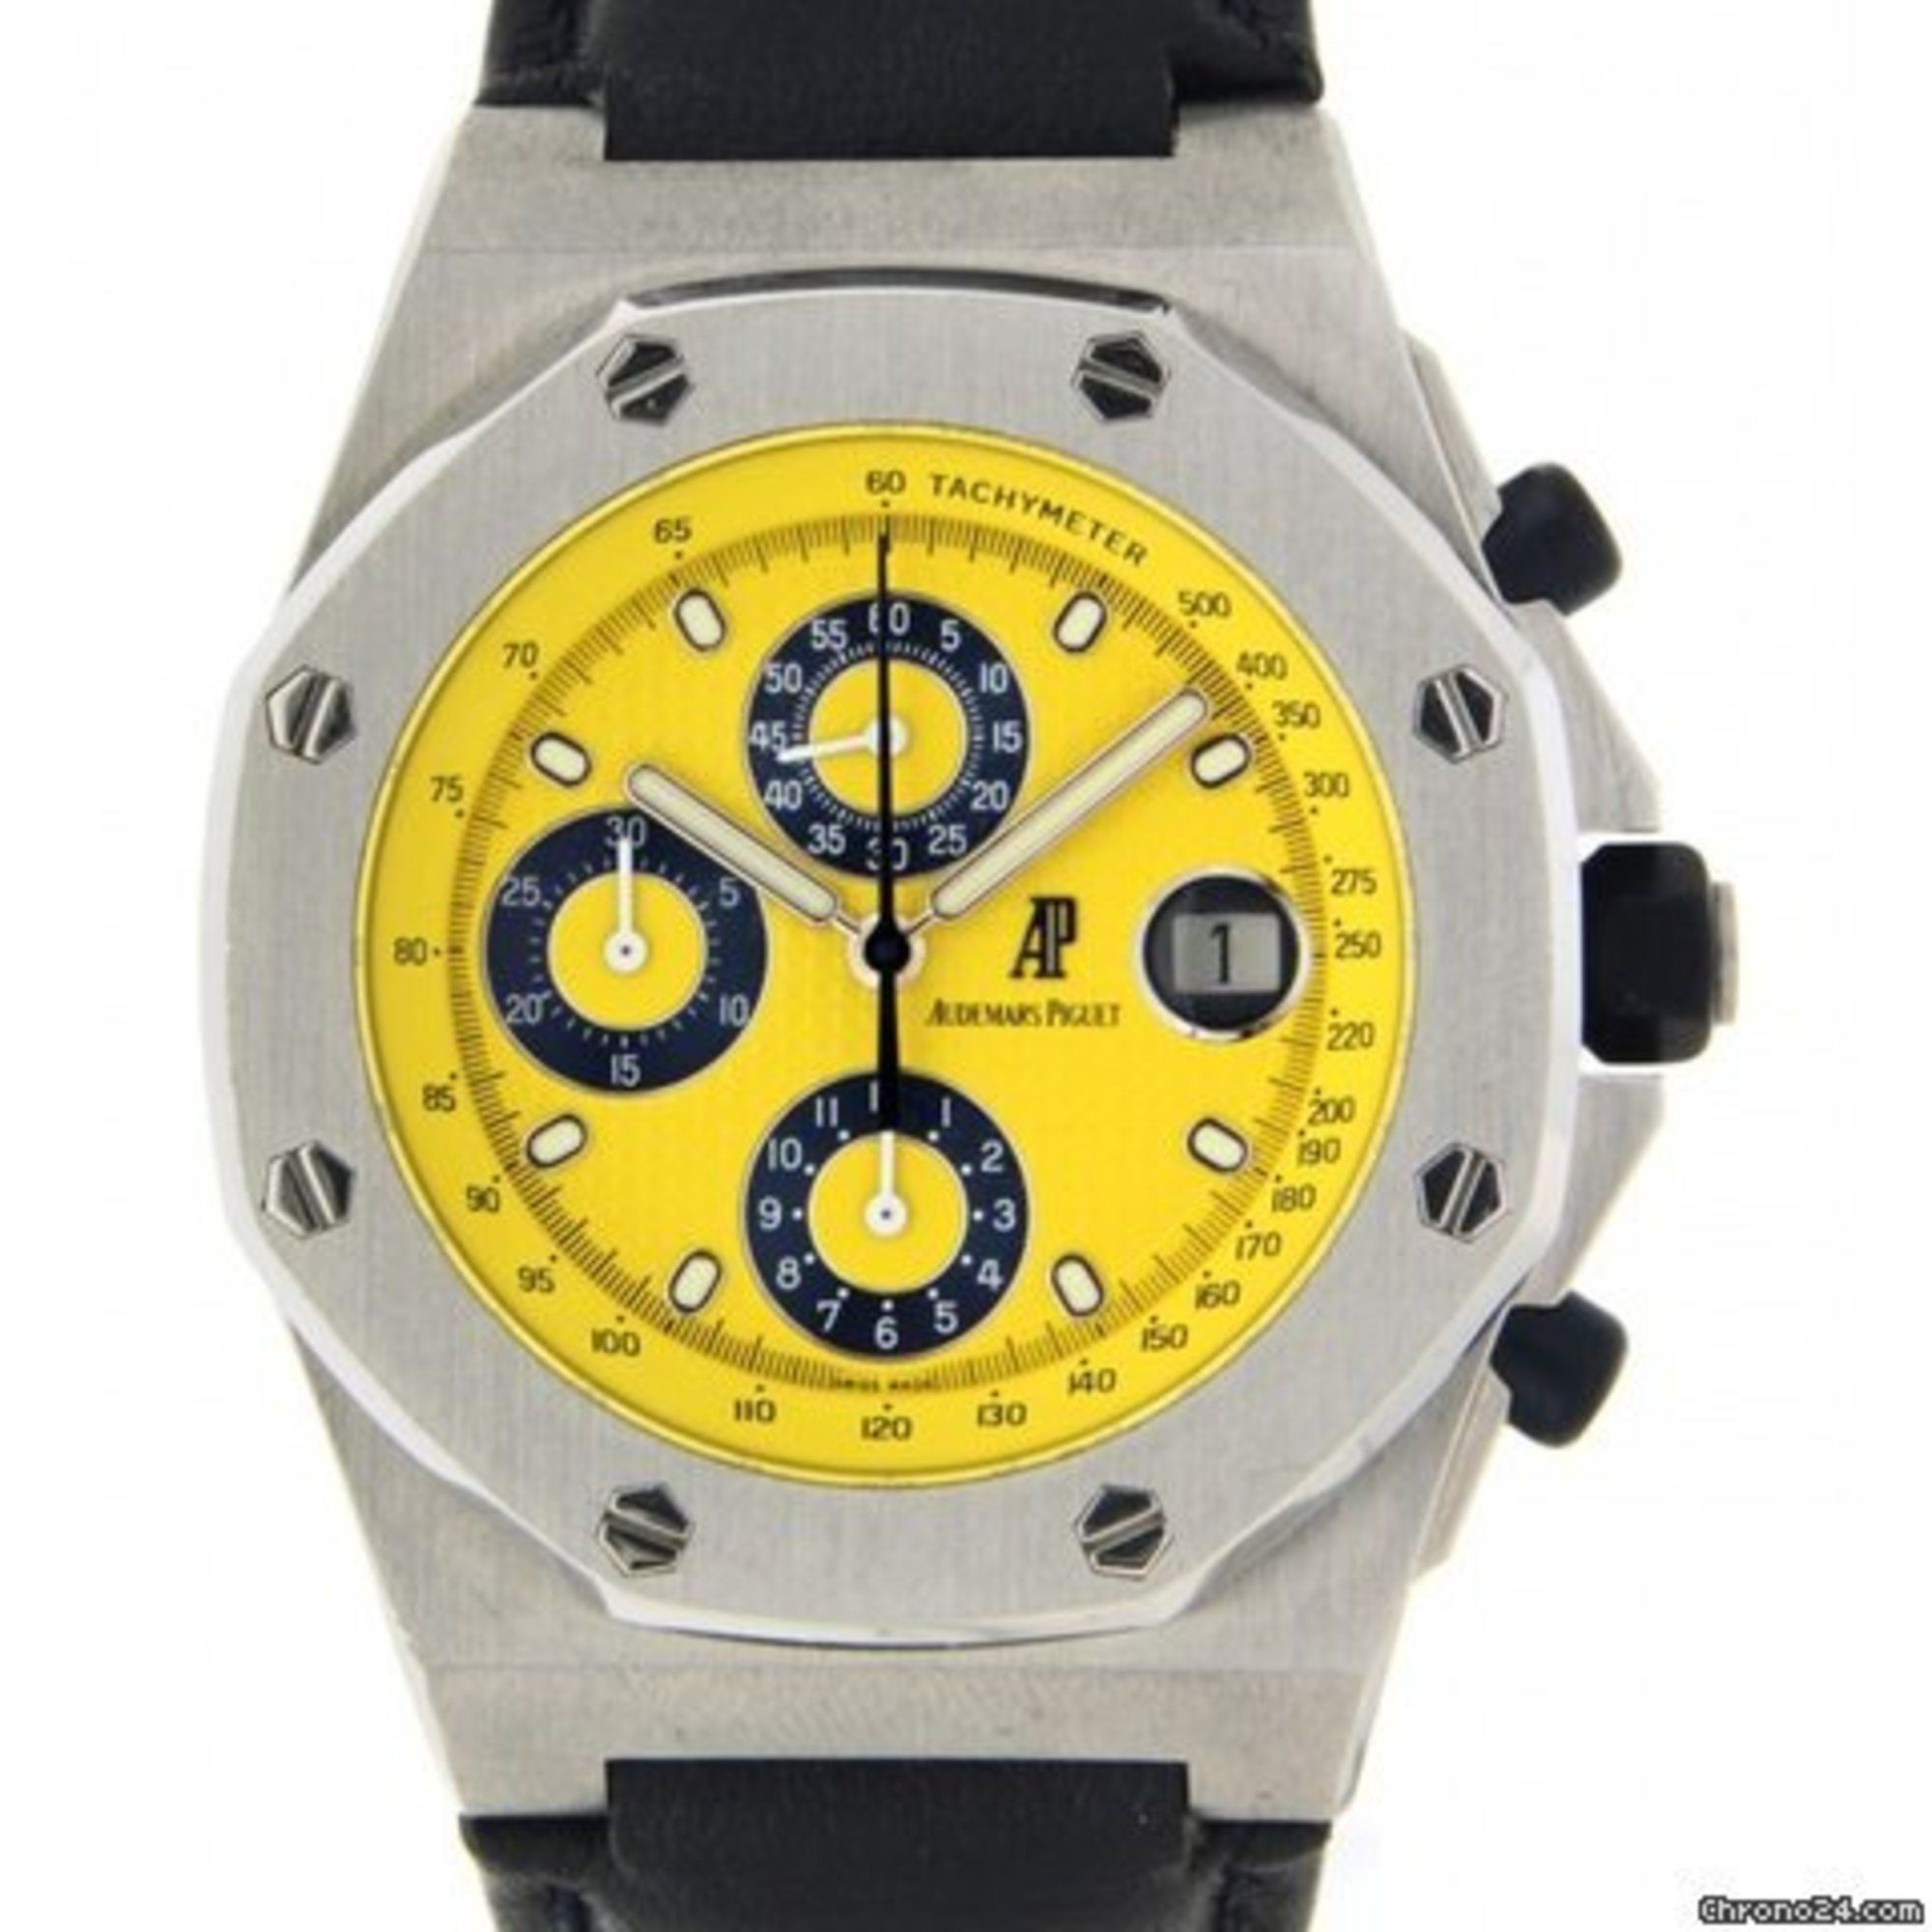 Royal Oak Offshore Chronograph in Steel on Black Crocodile Strap with Yellow Waffle Dial